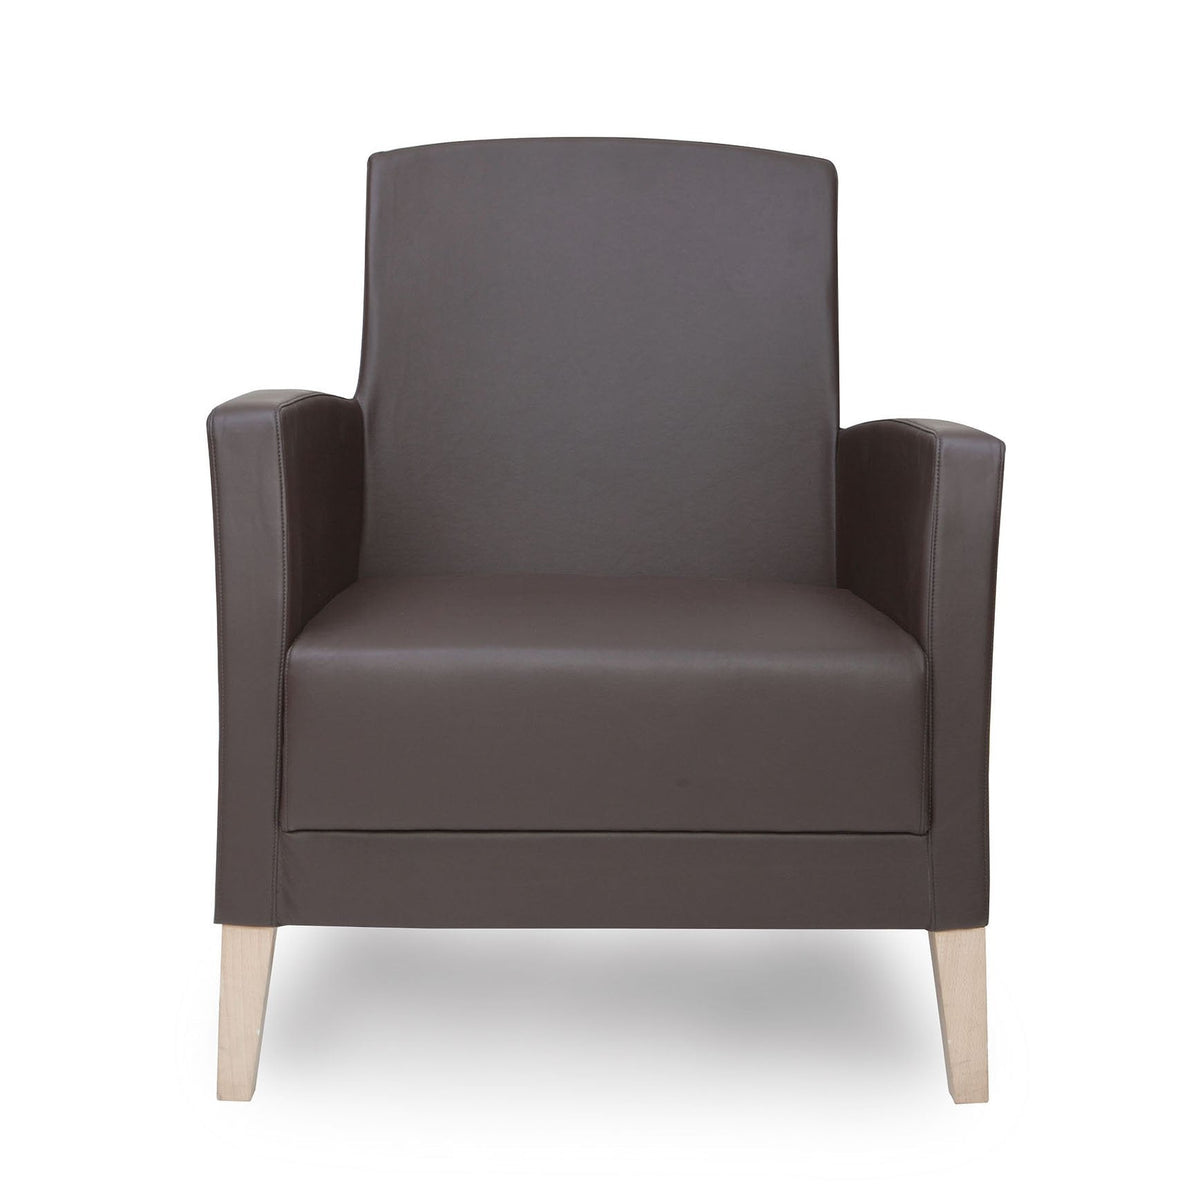 Fandango 78-62/1 Lounge Chair-Piaval-Contract Furniture Store